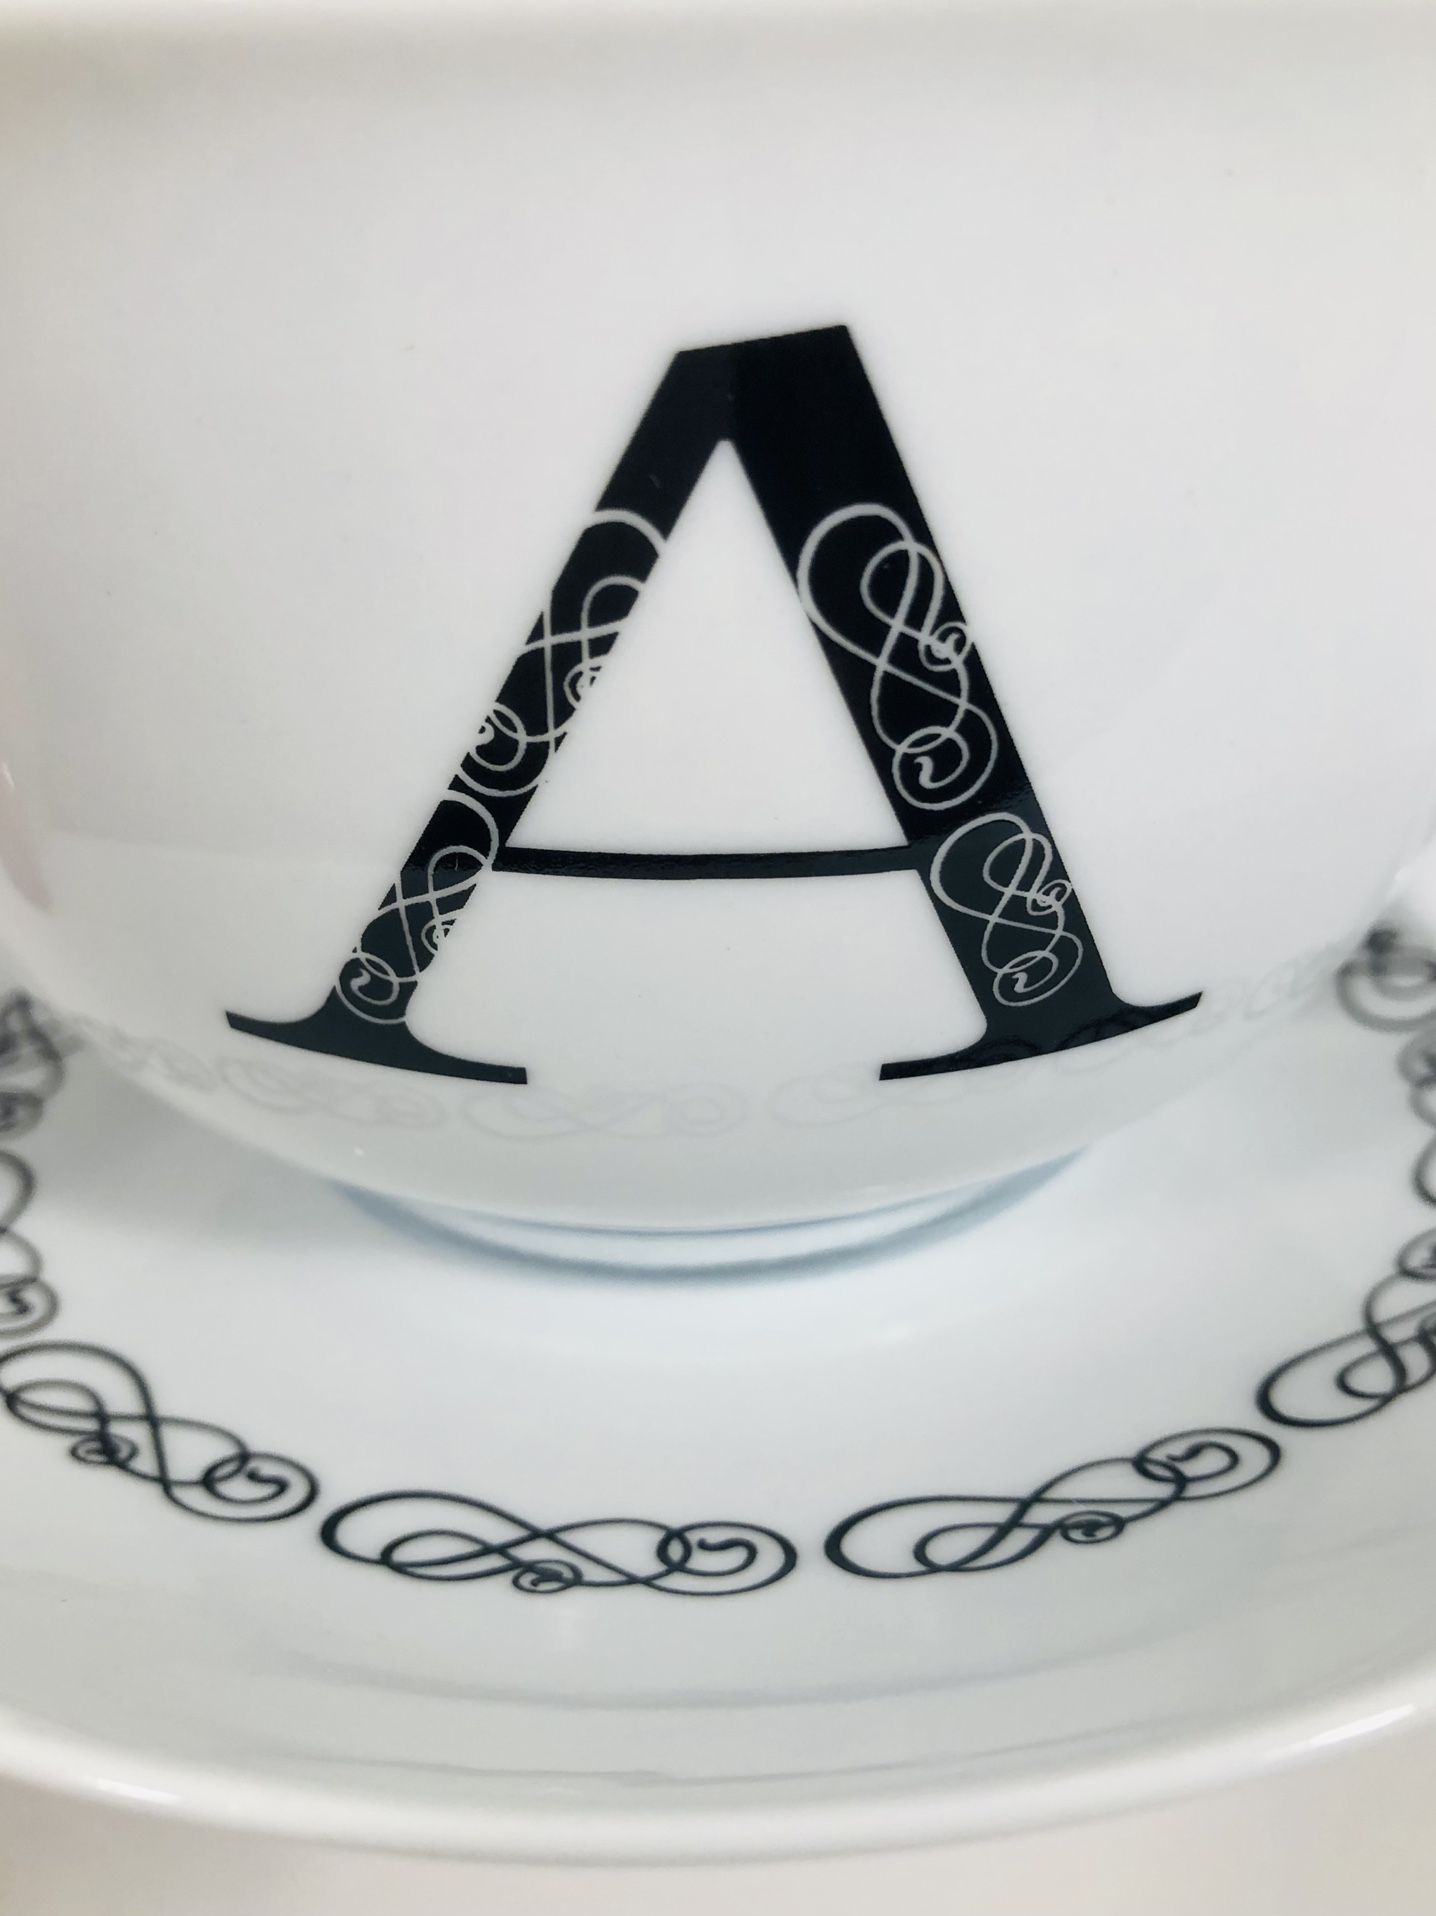 Grace And Teaware Letter “A” Cup and Saucer Set White